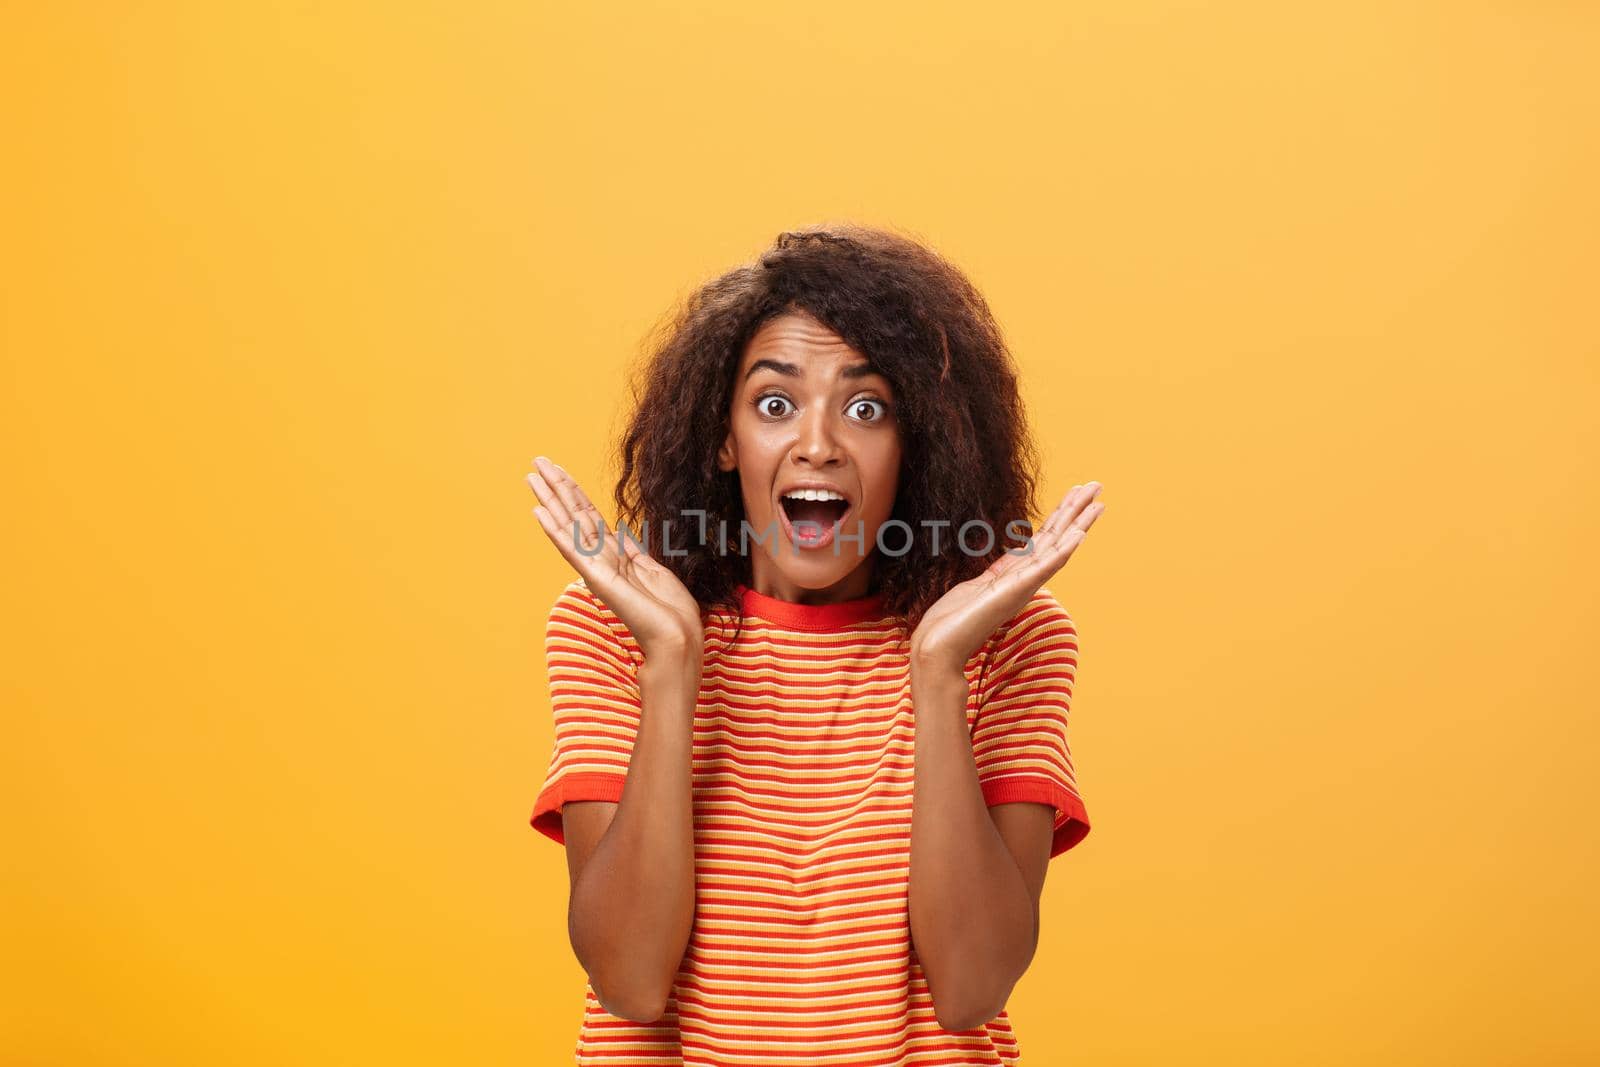 Waist-up shot of amazed joyful sociable dark-skinned female with afro hairstyle in striped t-shirt gesturing with palms raised near face gazing astonished and delighted at camera from surprise and joy. Lifestyle.